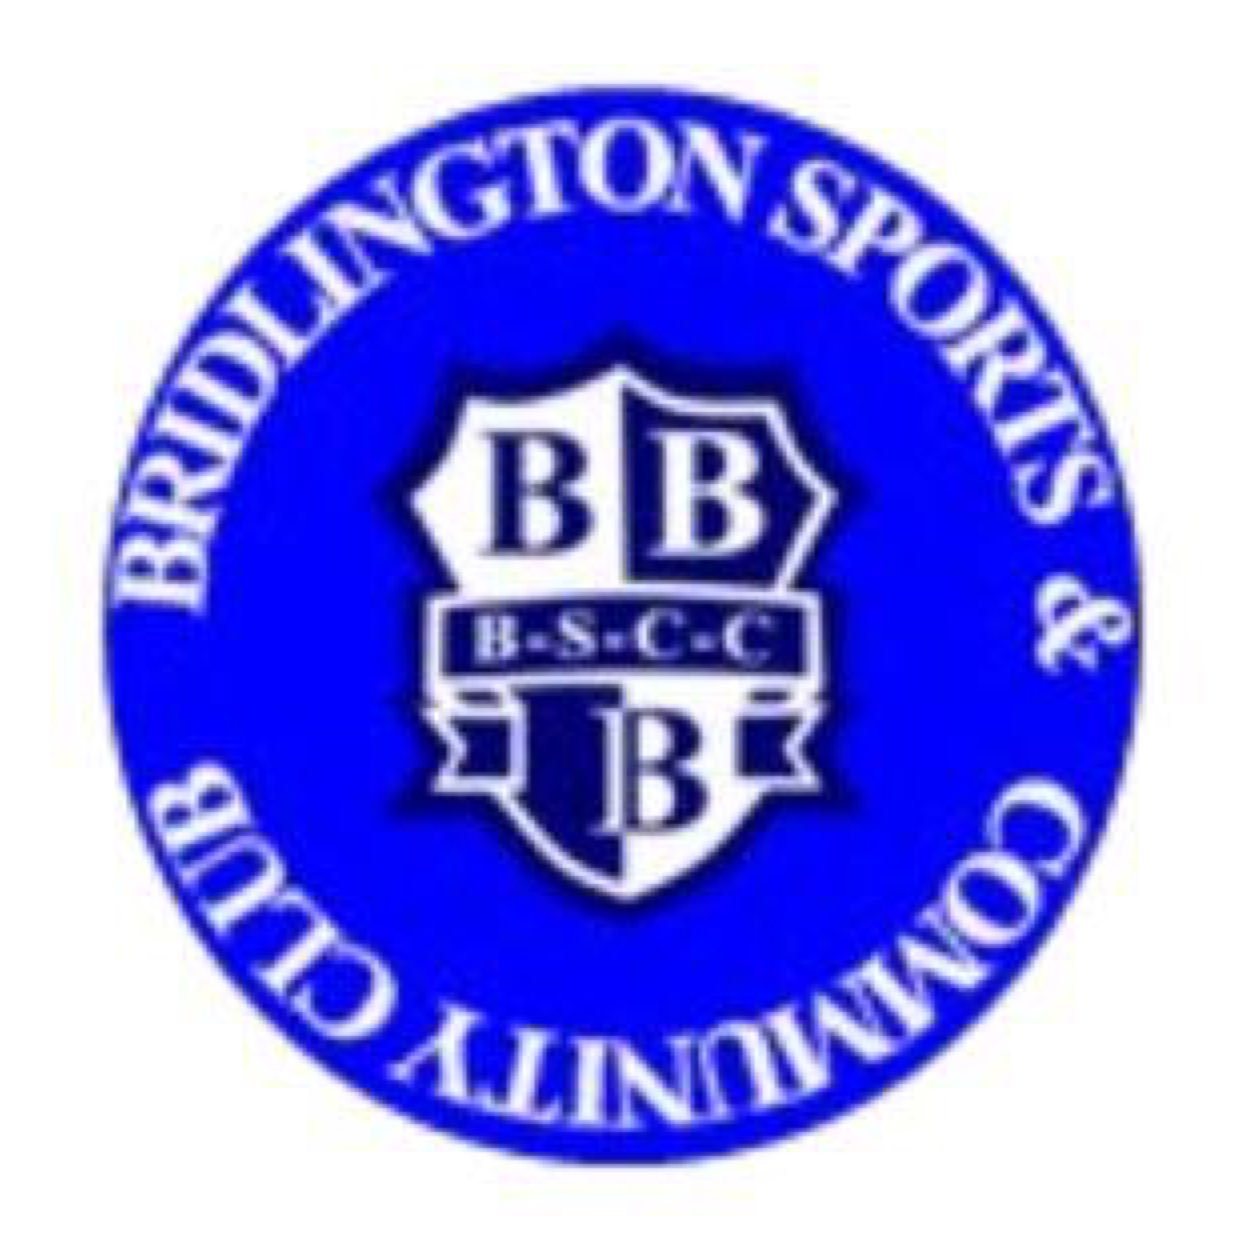 Official page for Brid Sports Club County playing in the @ERcountyleague Premier. Sponsored by R Druce Joinery, JDC Plumbing & Heating and Advanced Solutions